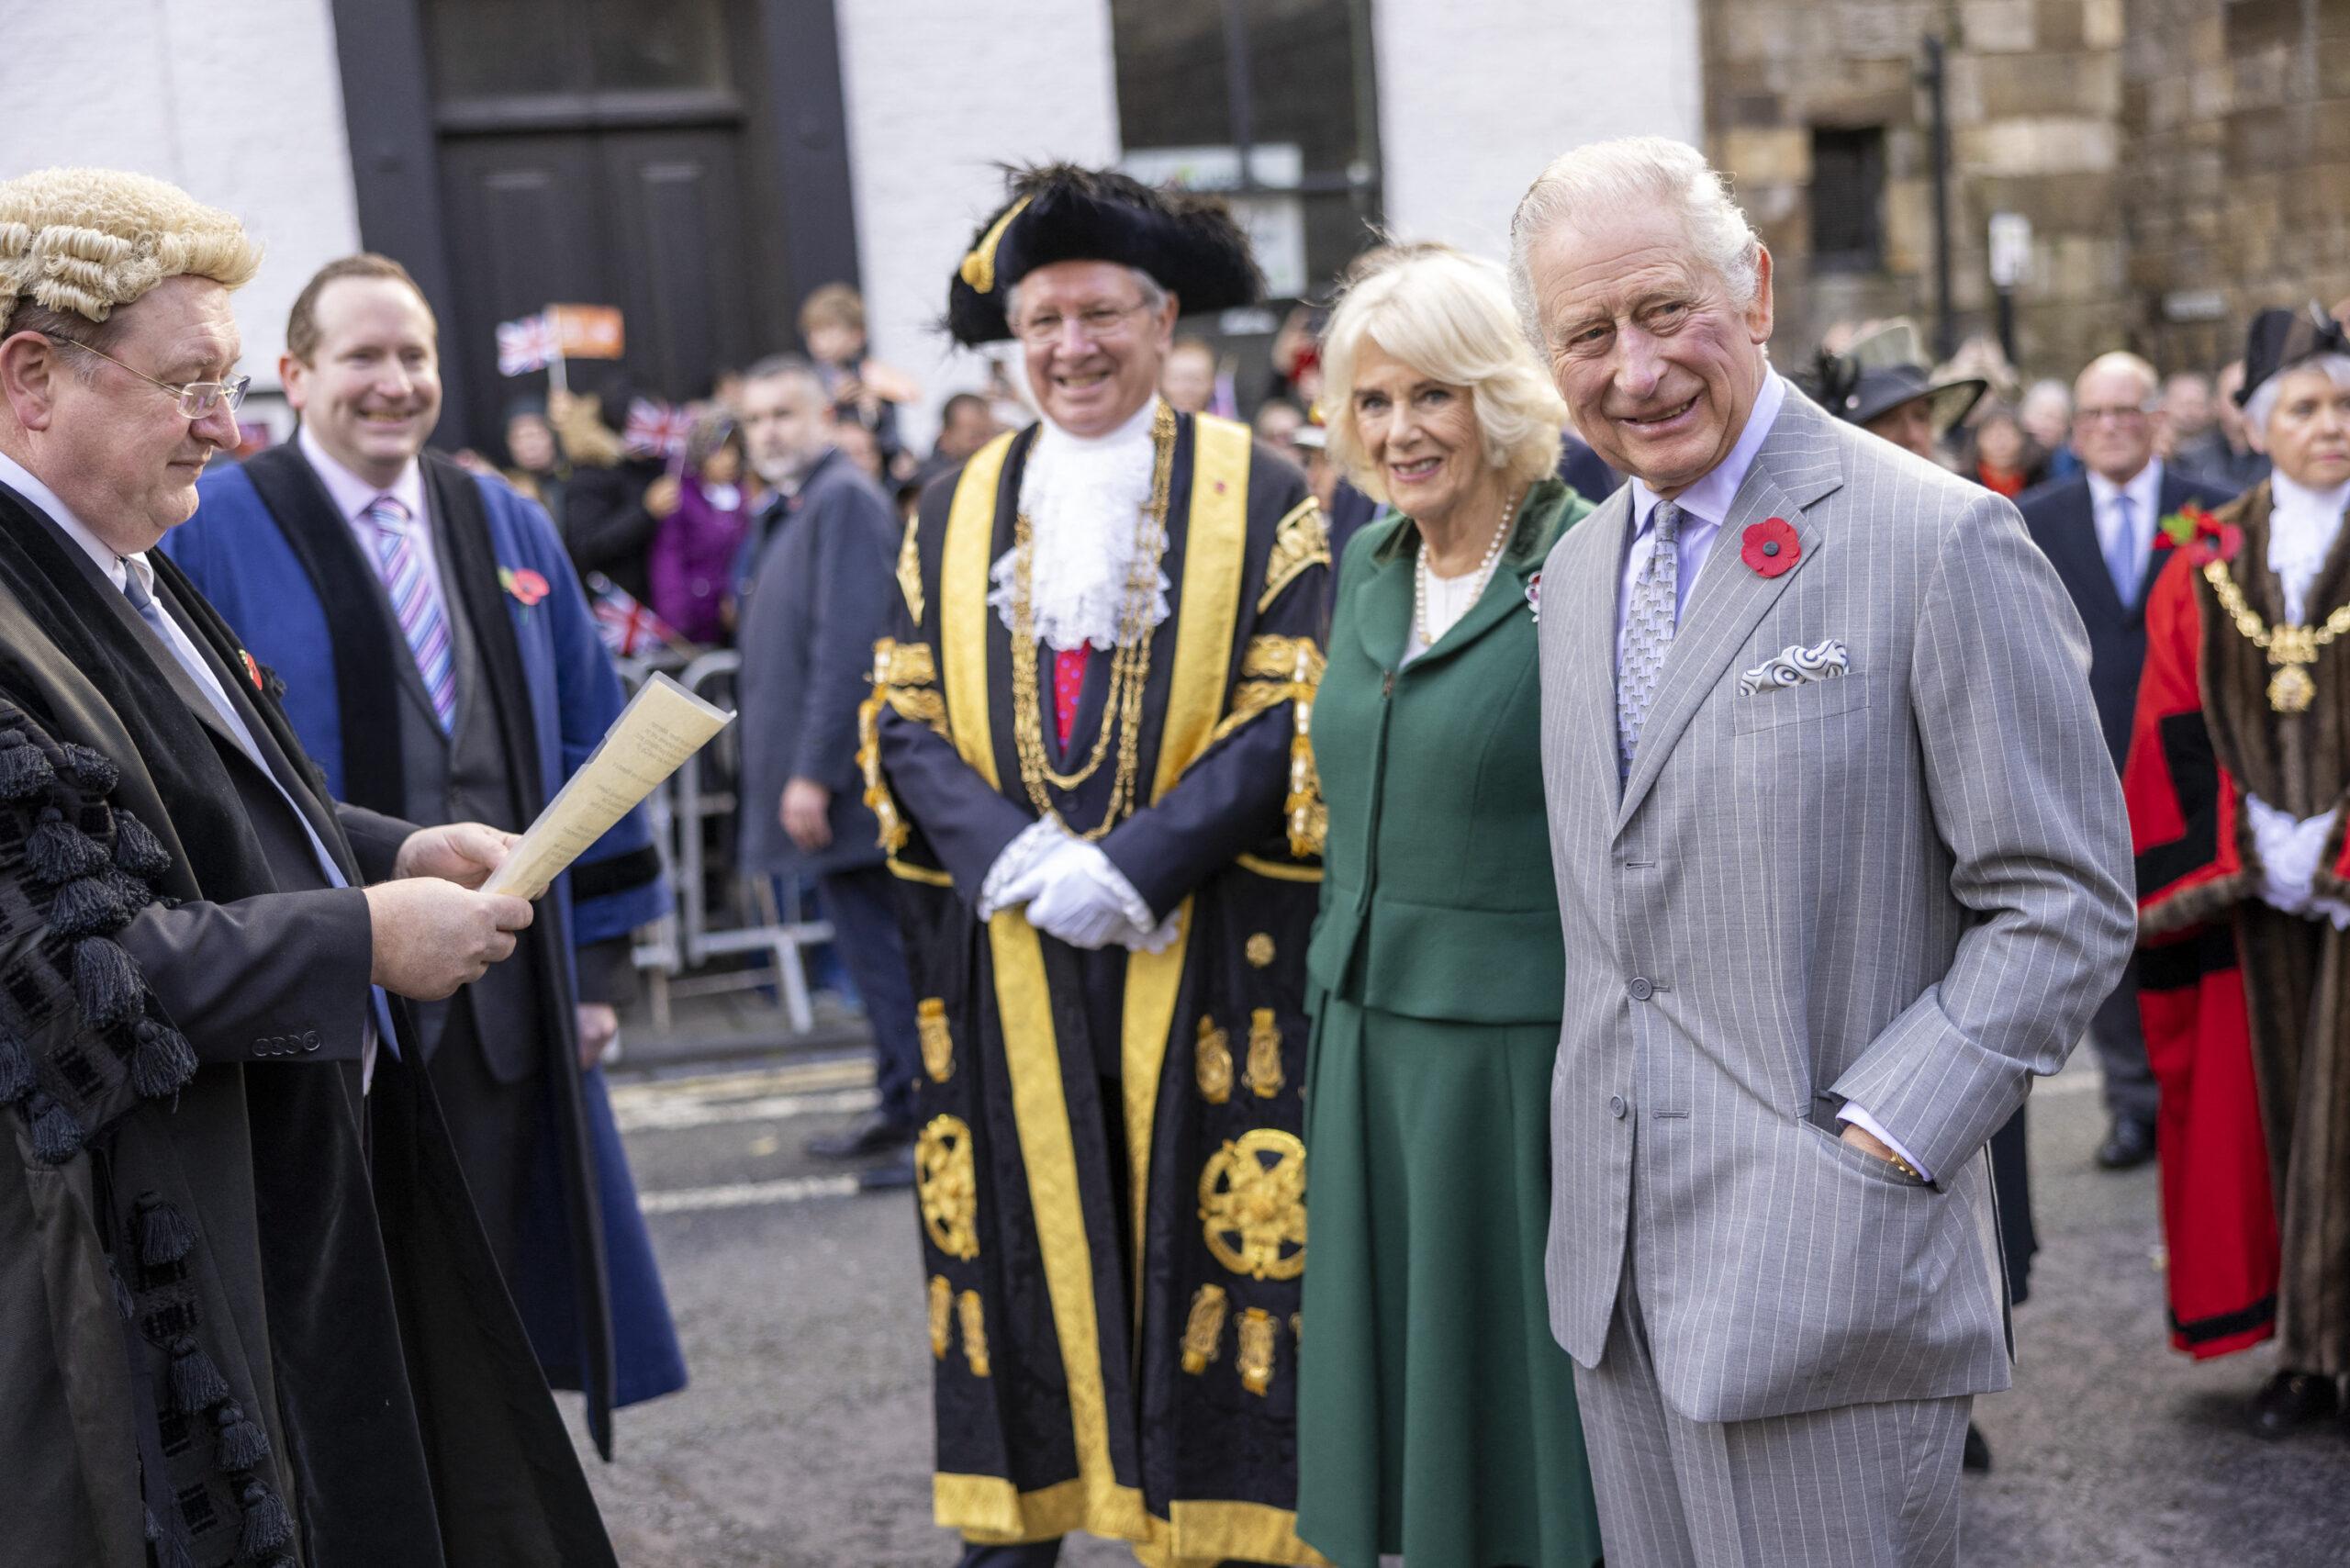 King Charles III dodges an agg thrown by a protestor as he visits York